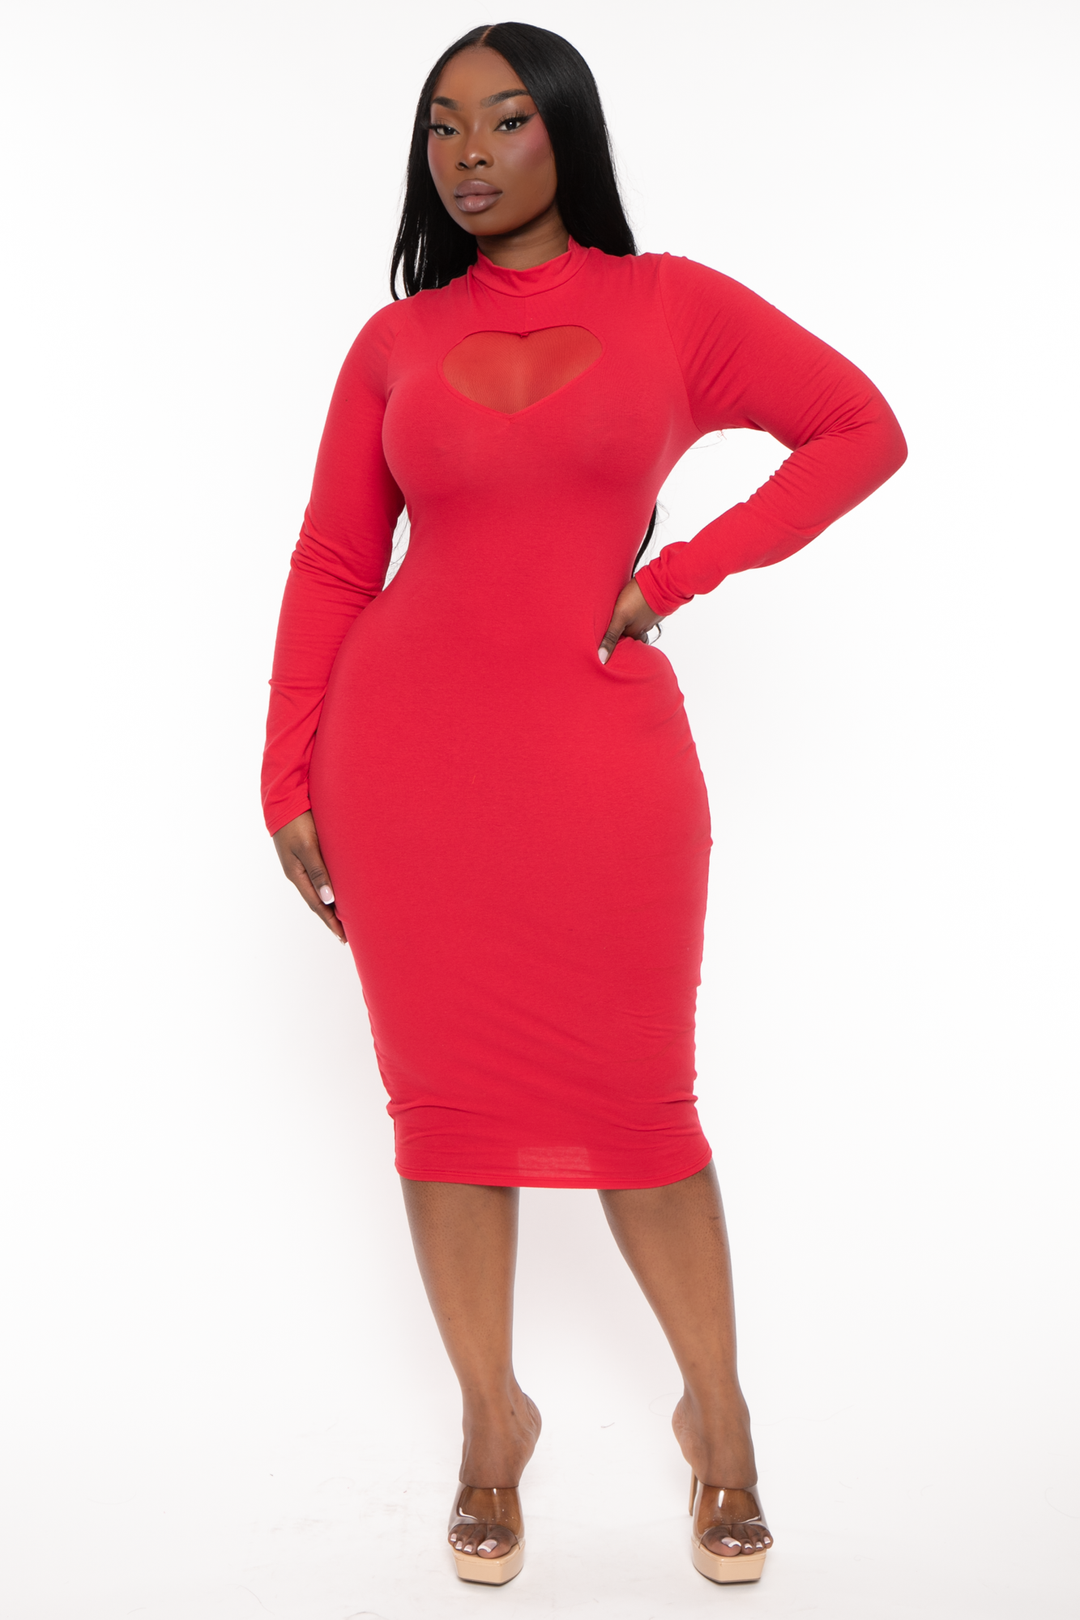 Plus Size Lovey Heart Cut Out Dress - Red